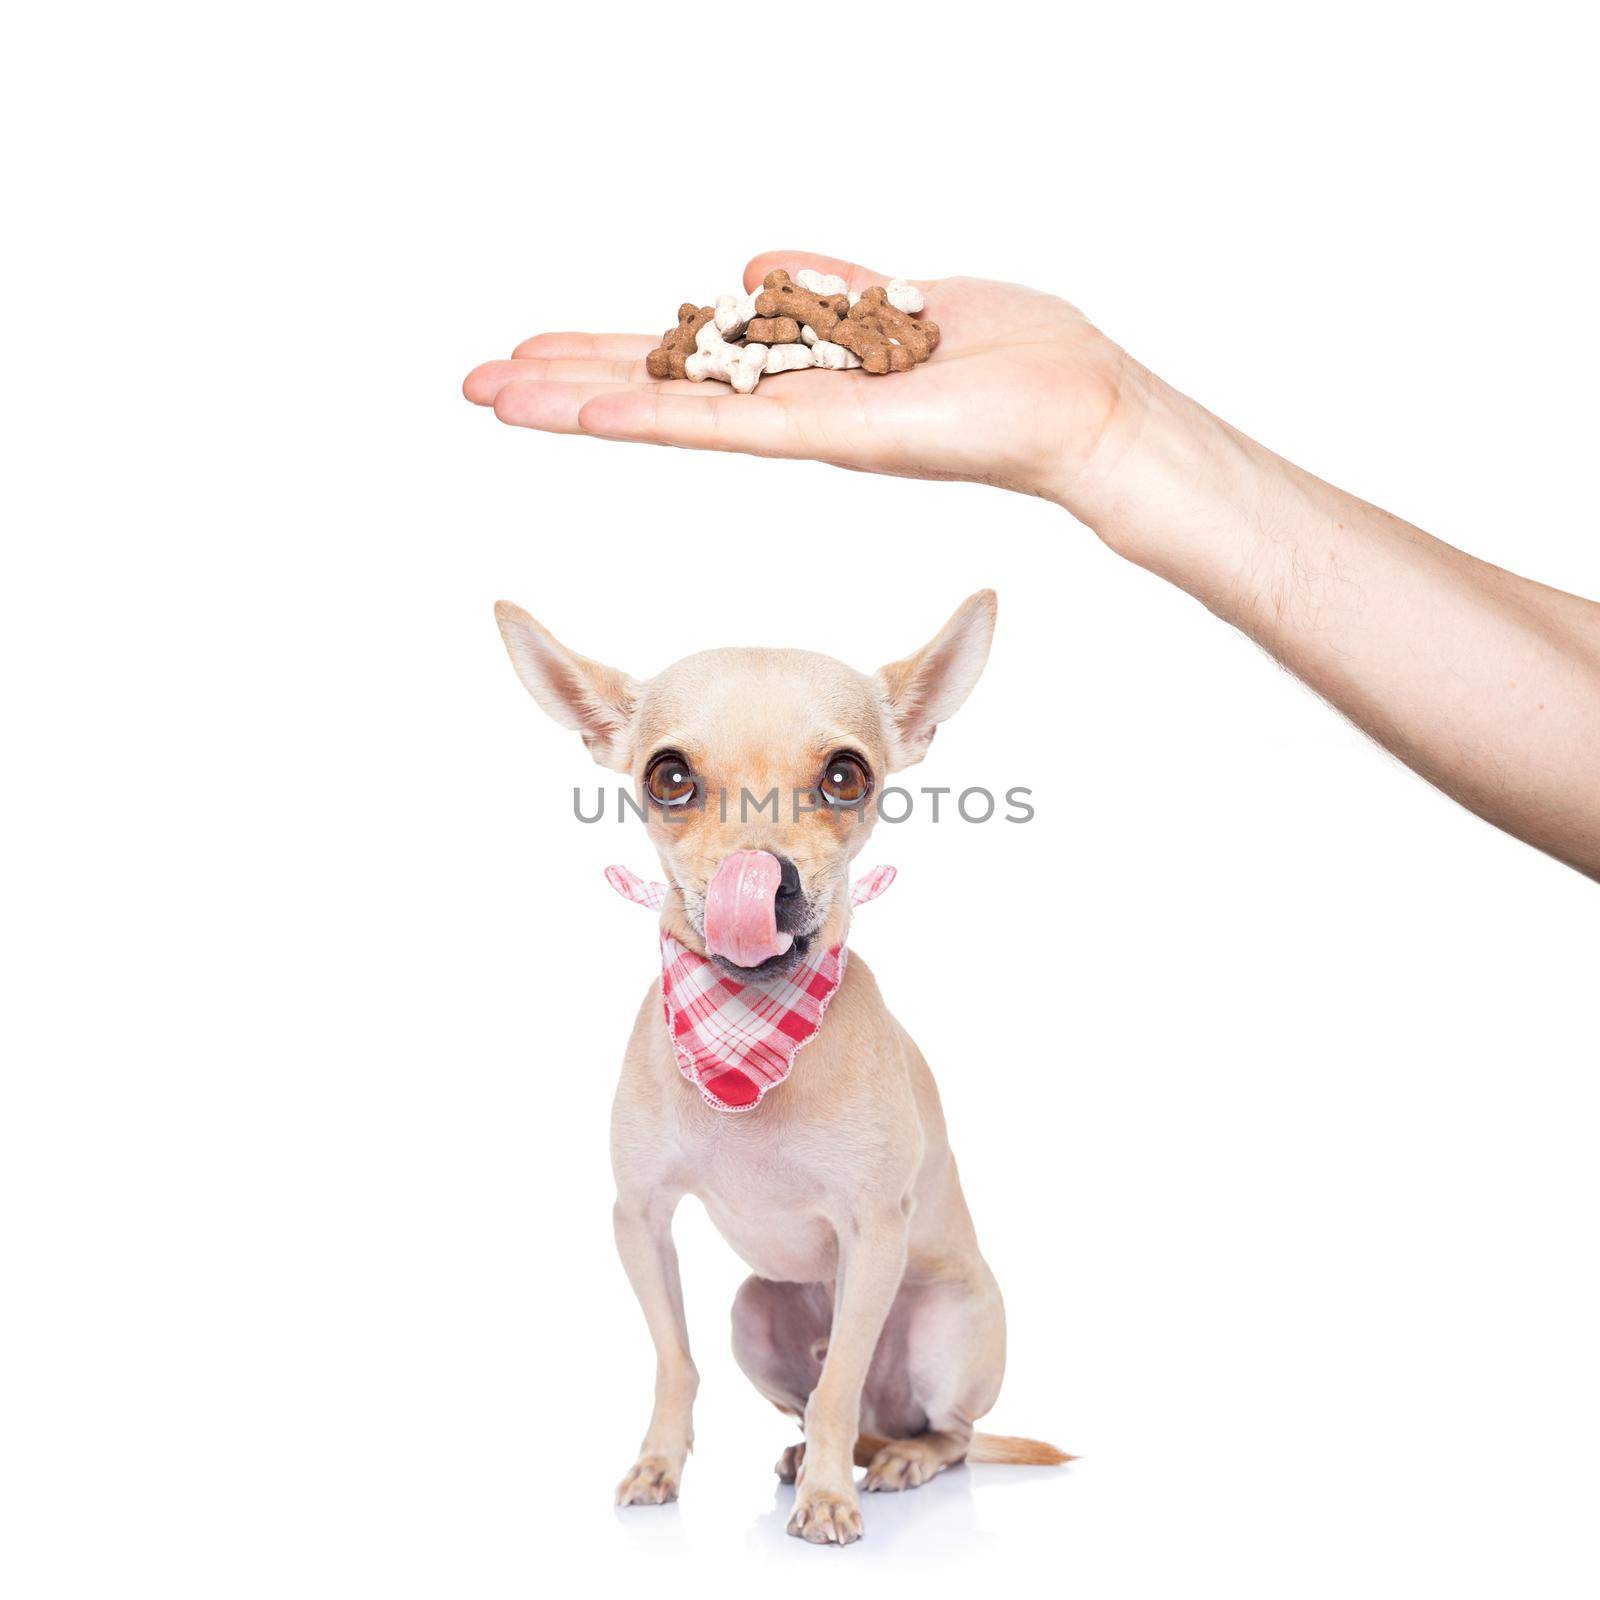 hungry chihuahua dog thinking and hoping for a treat by owner with hand,  isolated on white background